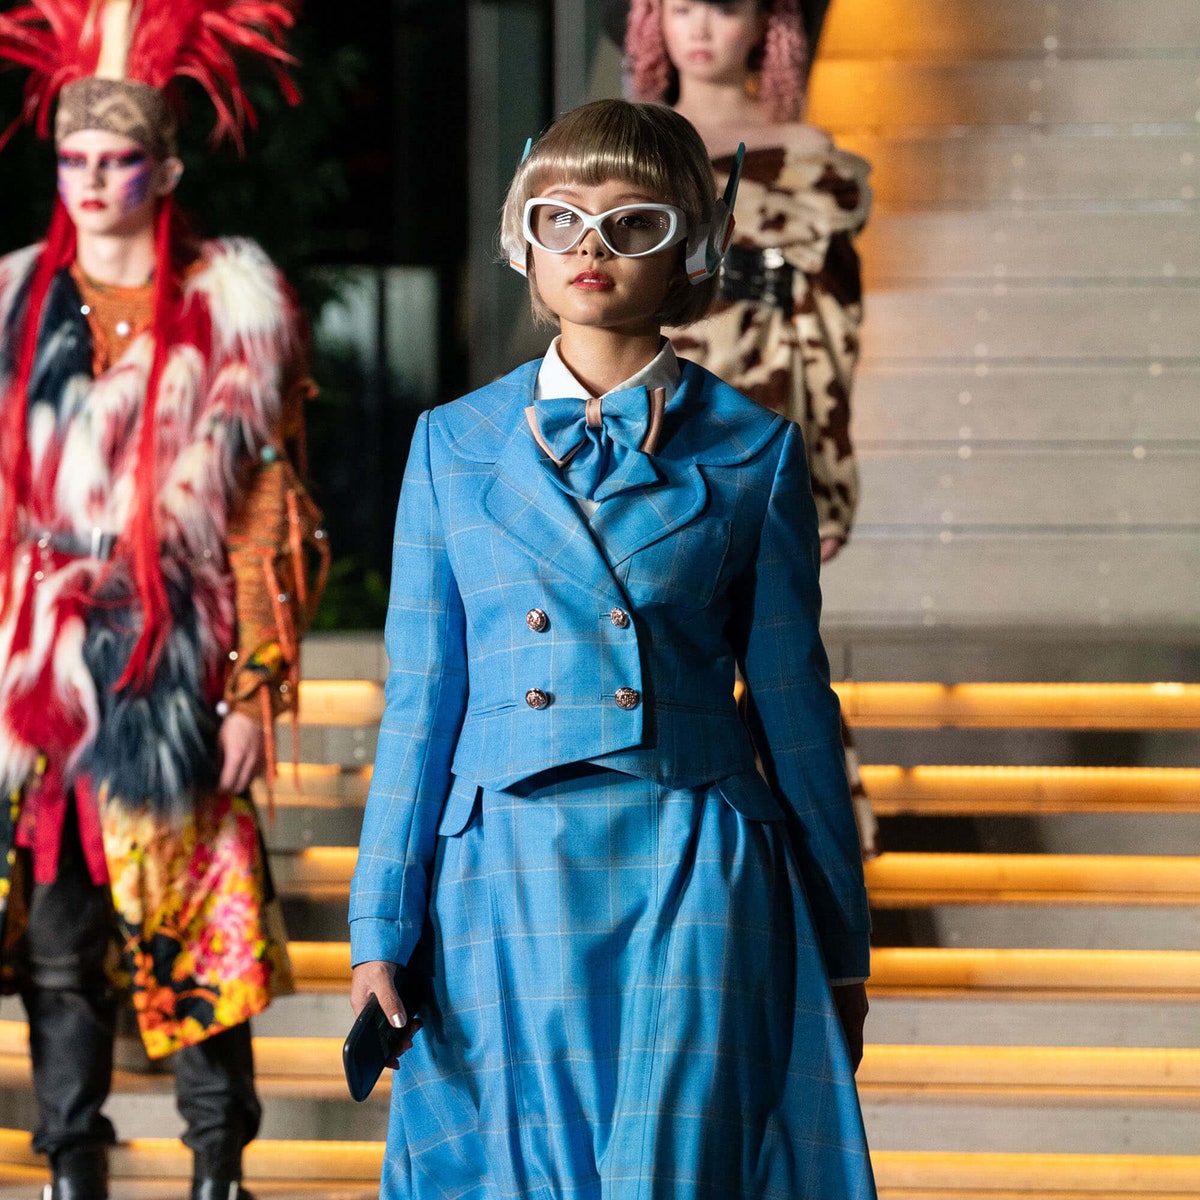 Can a new Tokyo fashion festival revitalise Japan’s retail industry?